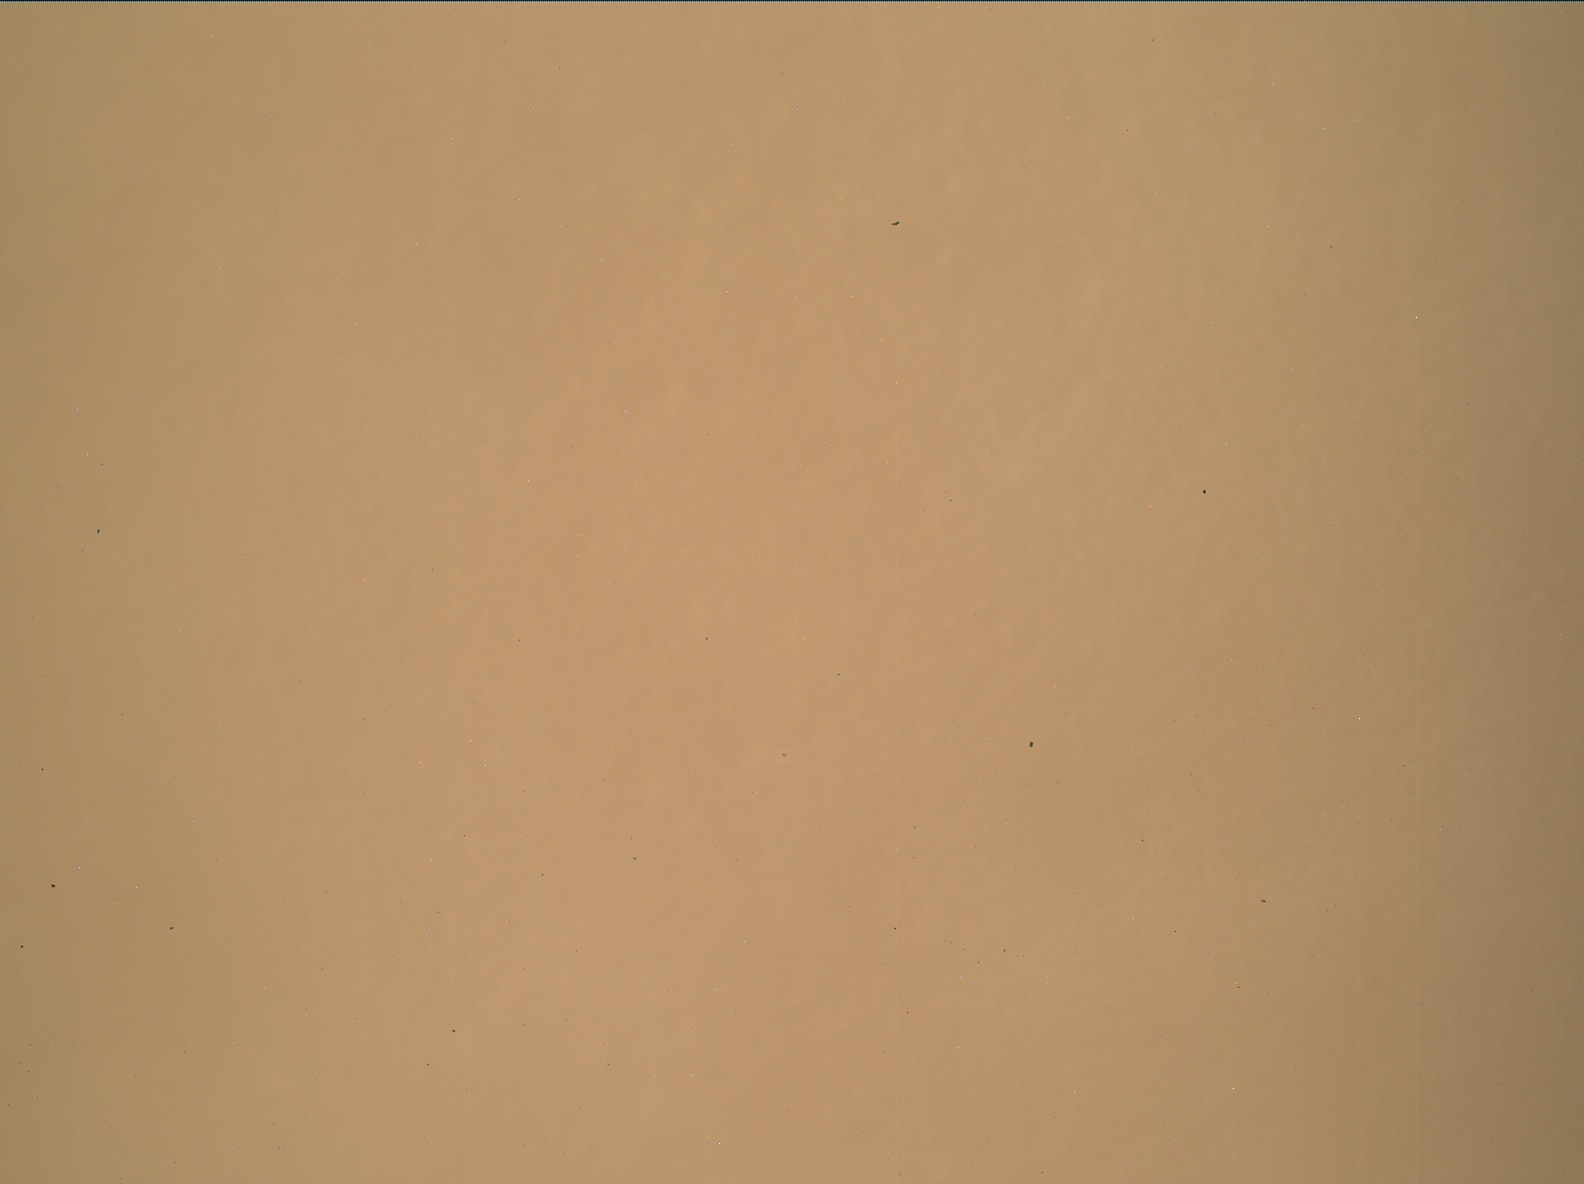 Nasa's Mars rover Curiosity acquired this image using its Mars Hand Lens Imager (MAHLI) on Sol 2245